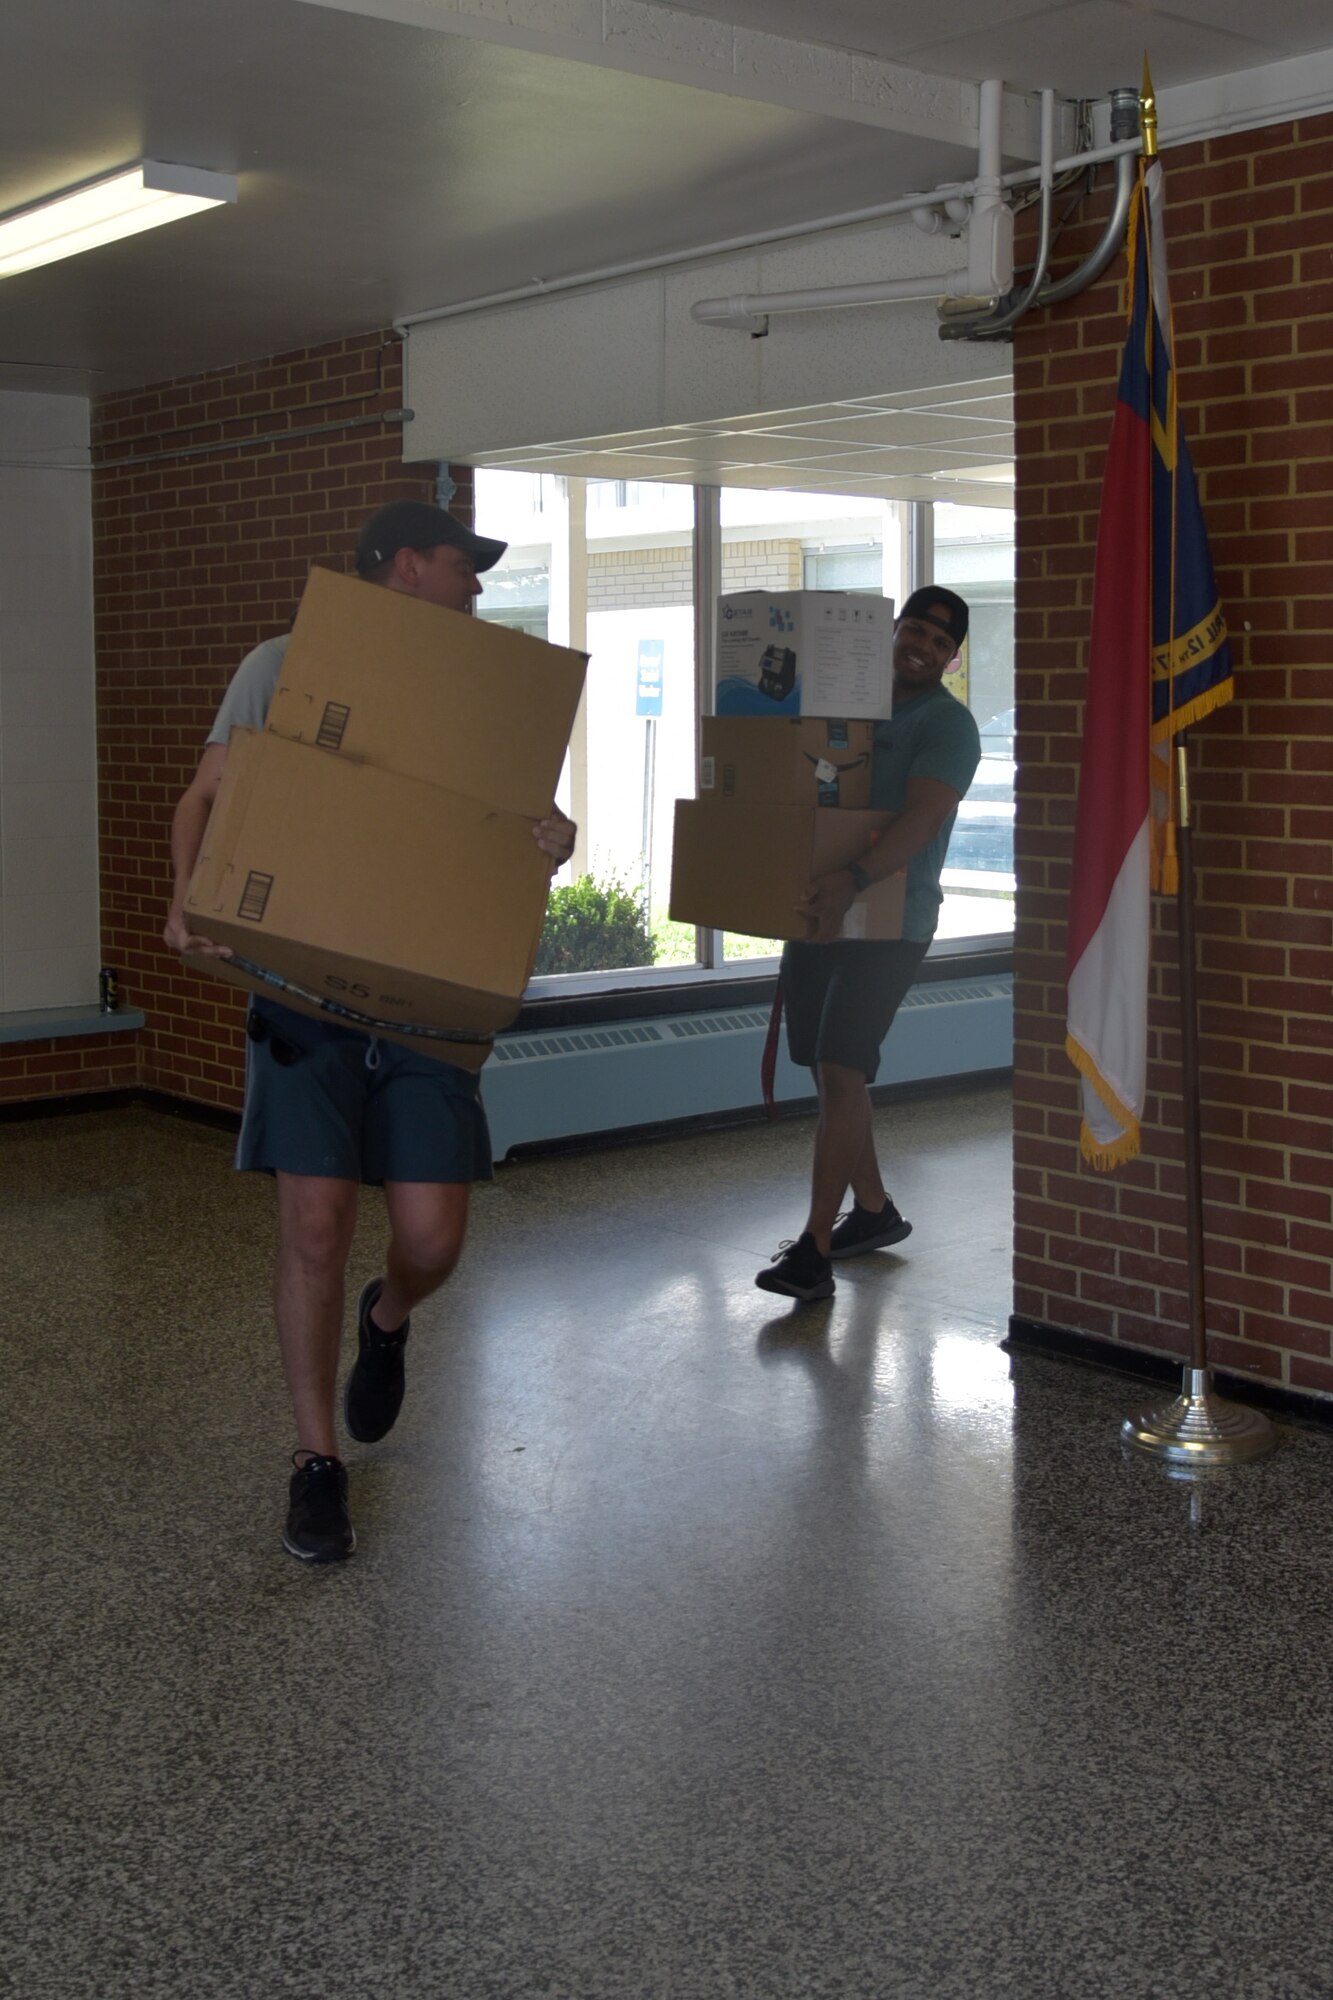 Airmen assigned to Seymour Johnson Air Force Base assist with moving equipment from the old Meadow Lane Elementary School into the newly constructed facility June 14, 2019, in Goldsboro, North Carolina.